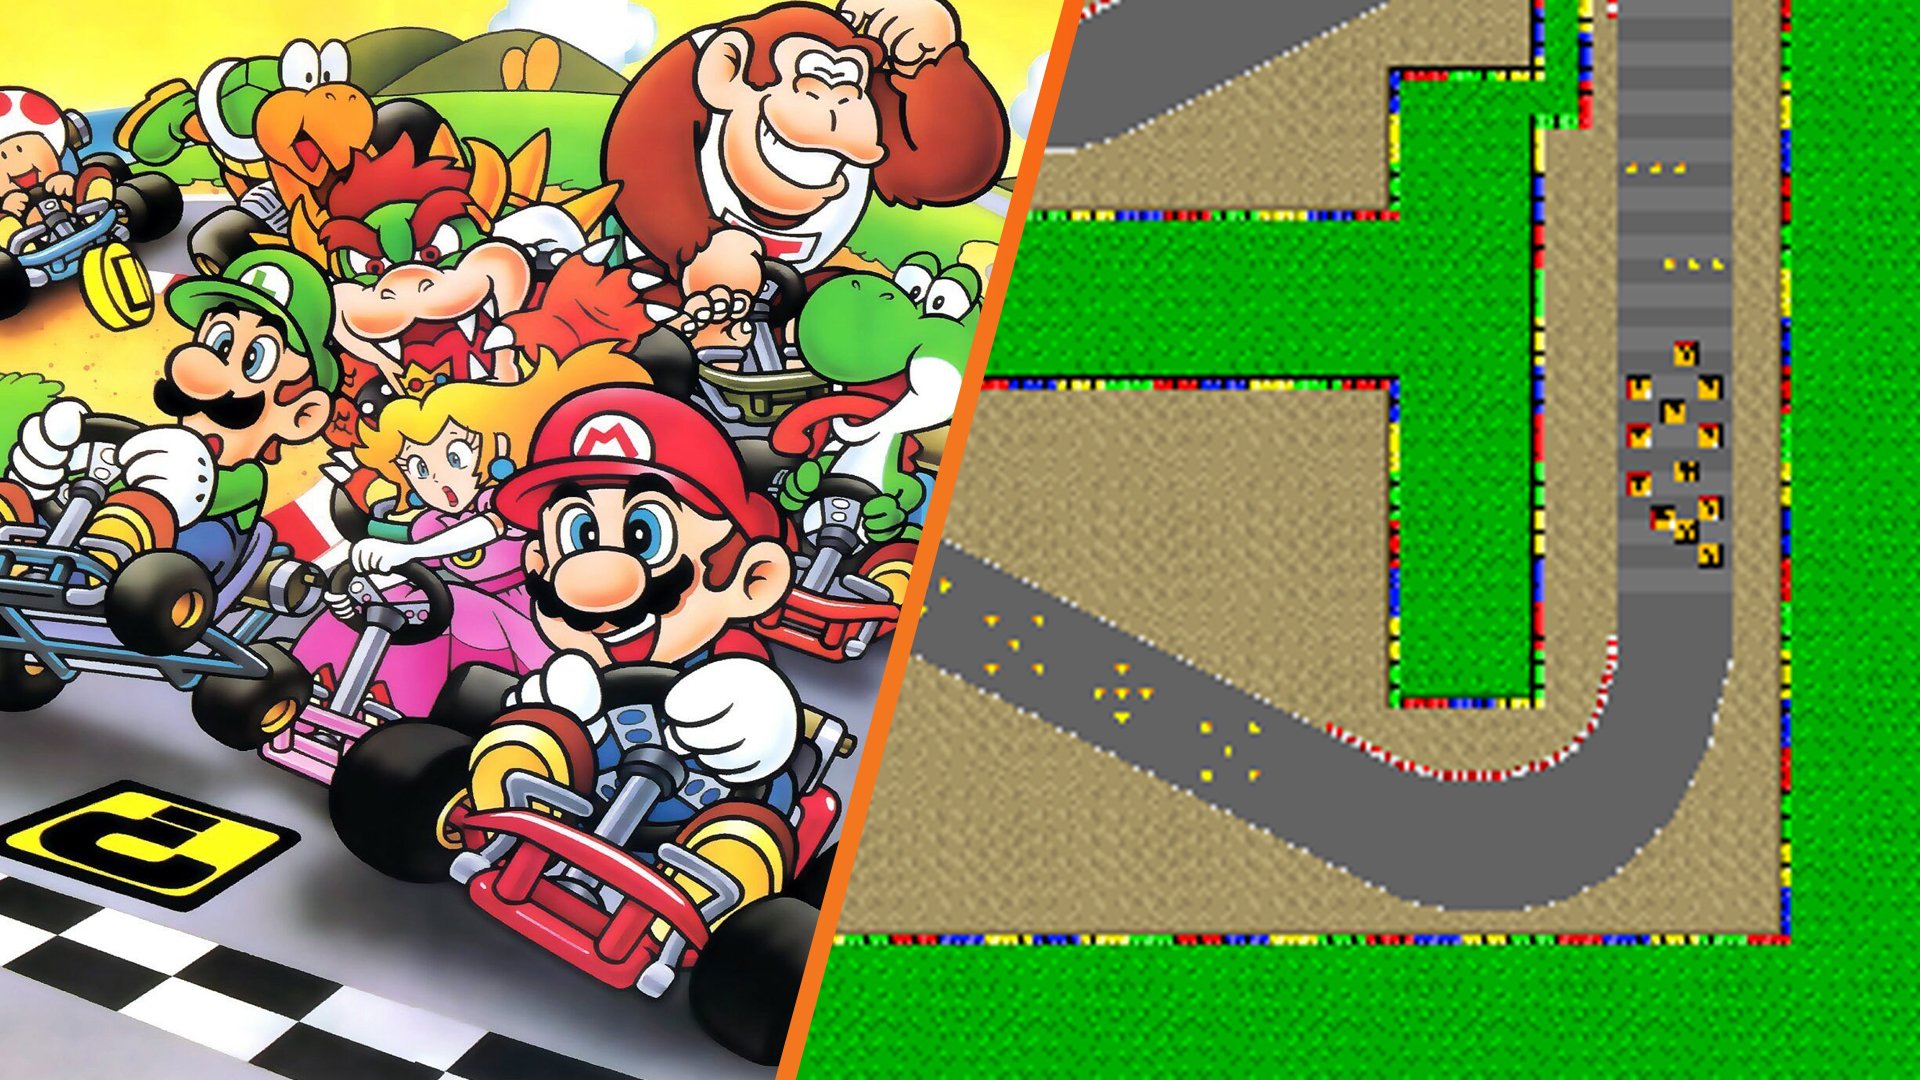 An early version of Mario Kart has been released, including a